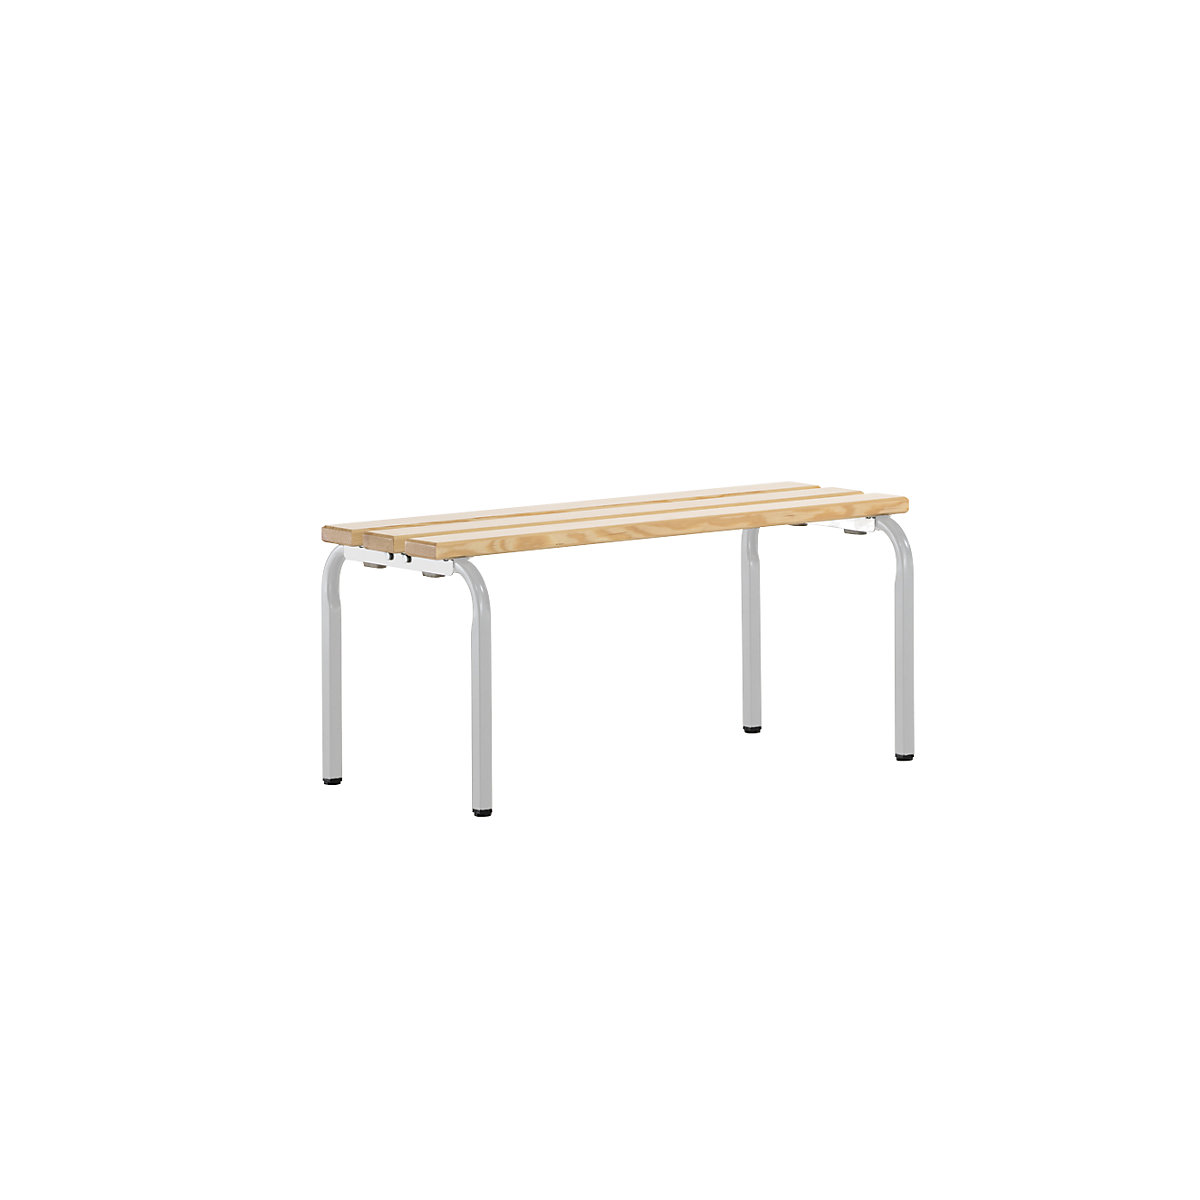 Cloakroom bench, stackable – Sypro